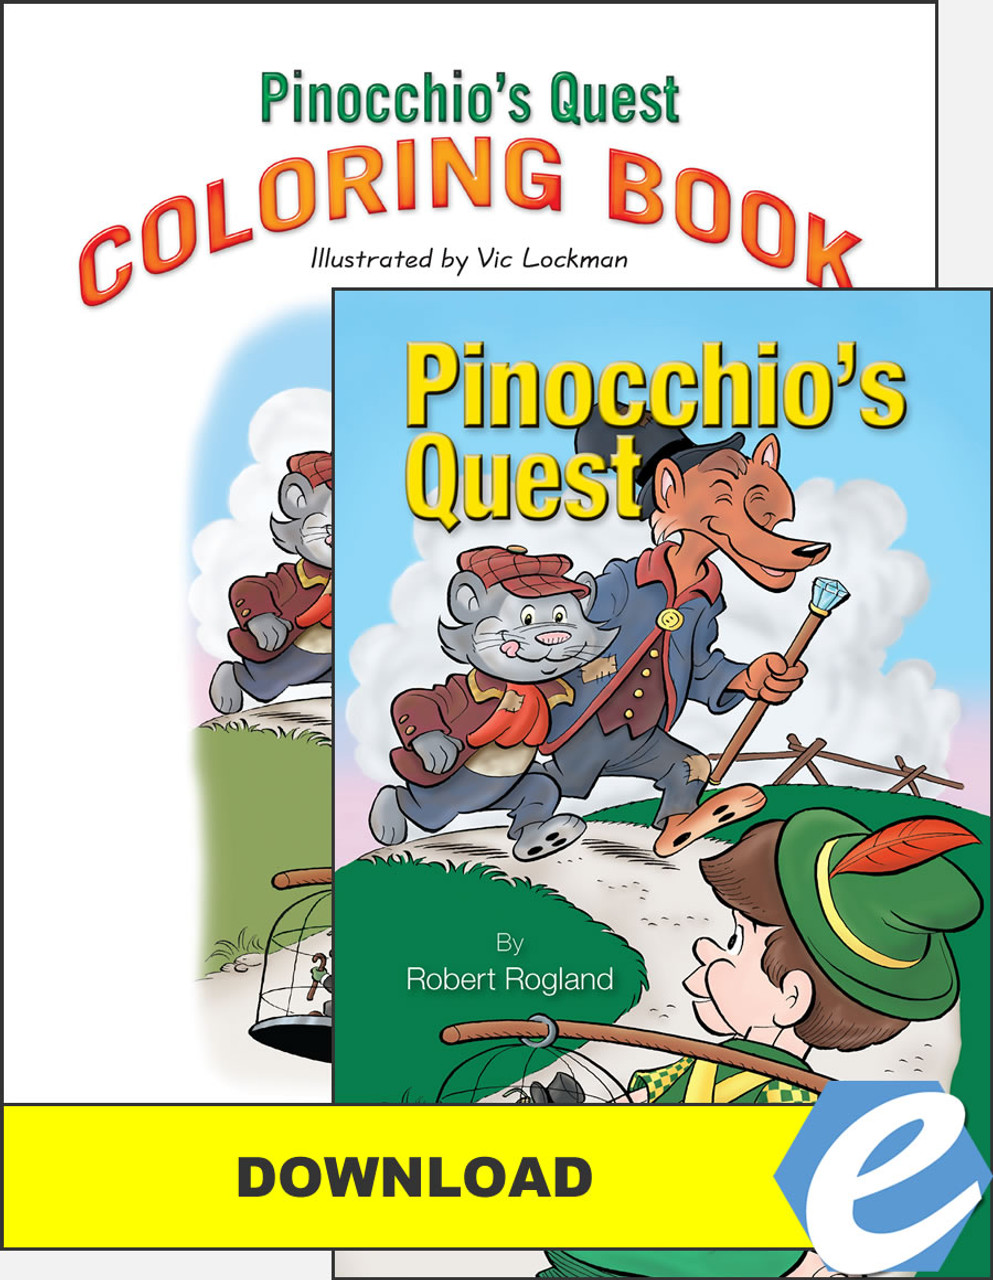 Pinocchio's Quest - Novel and Coloring Book Set - PDF Download